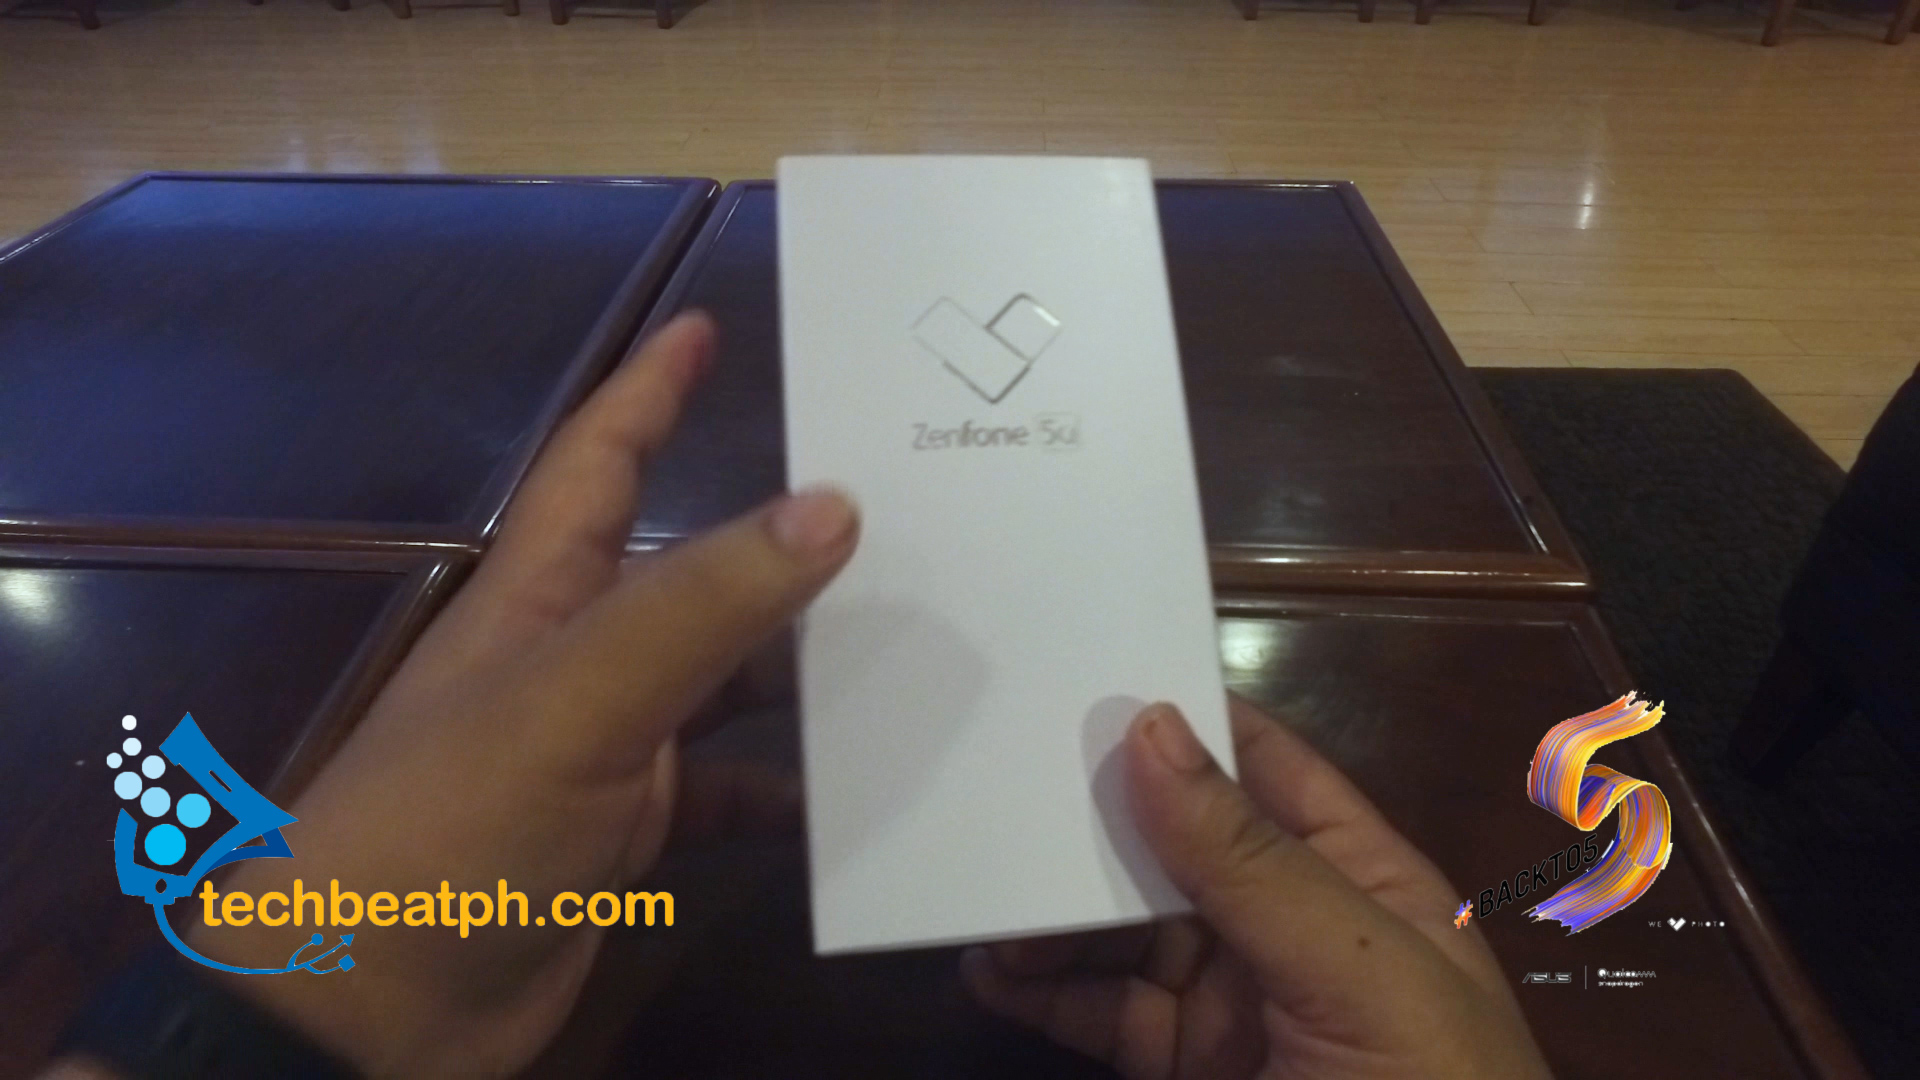 Asus Zenfone 5Q Unboxing and First Look